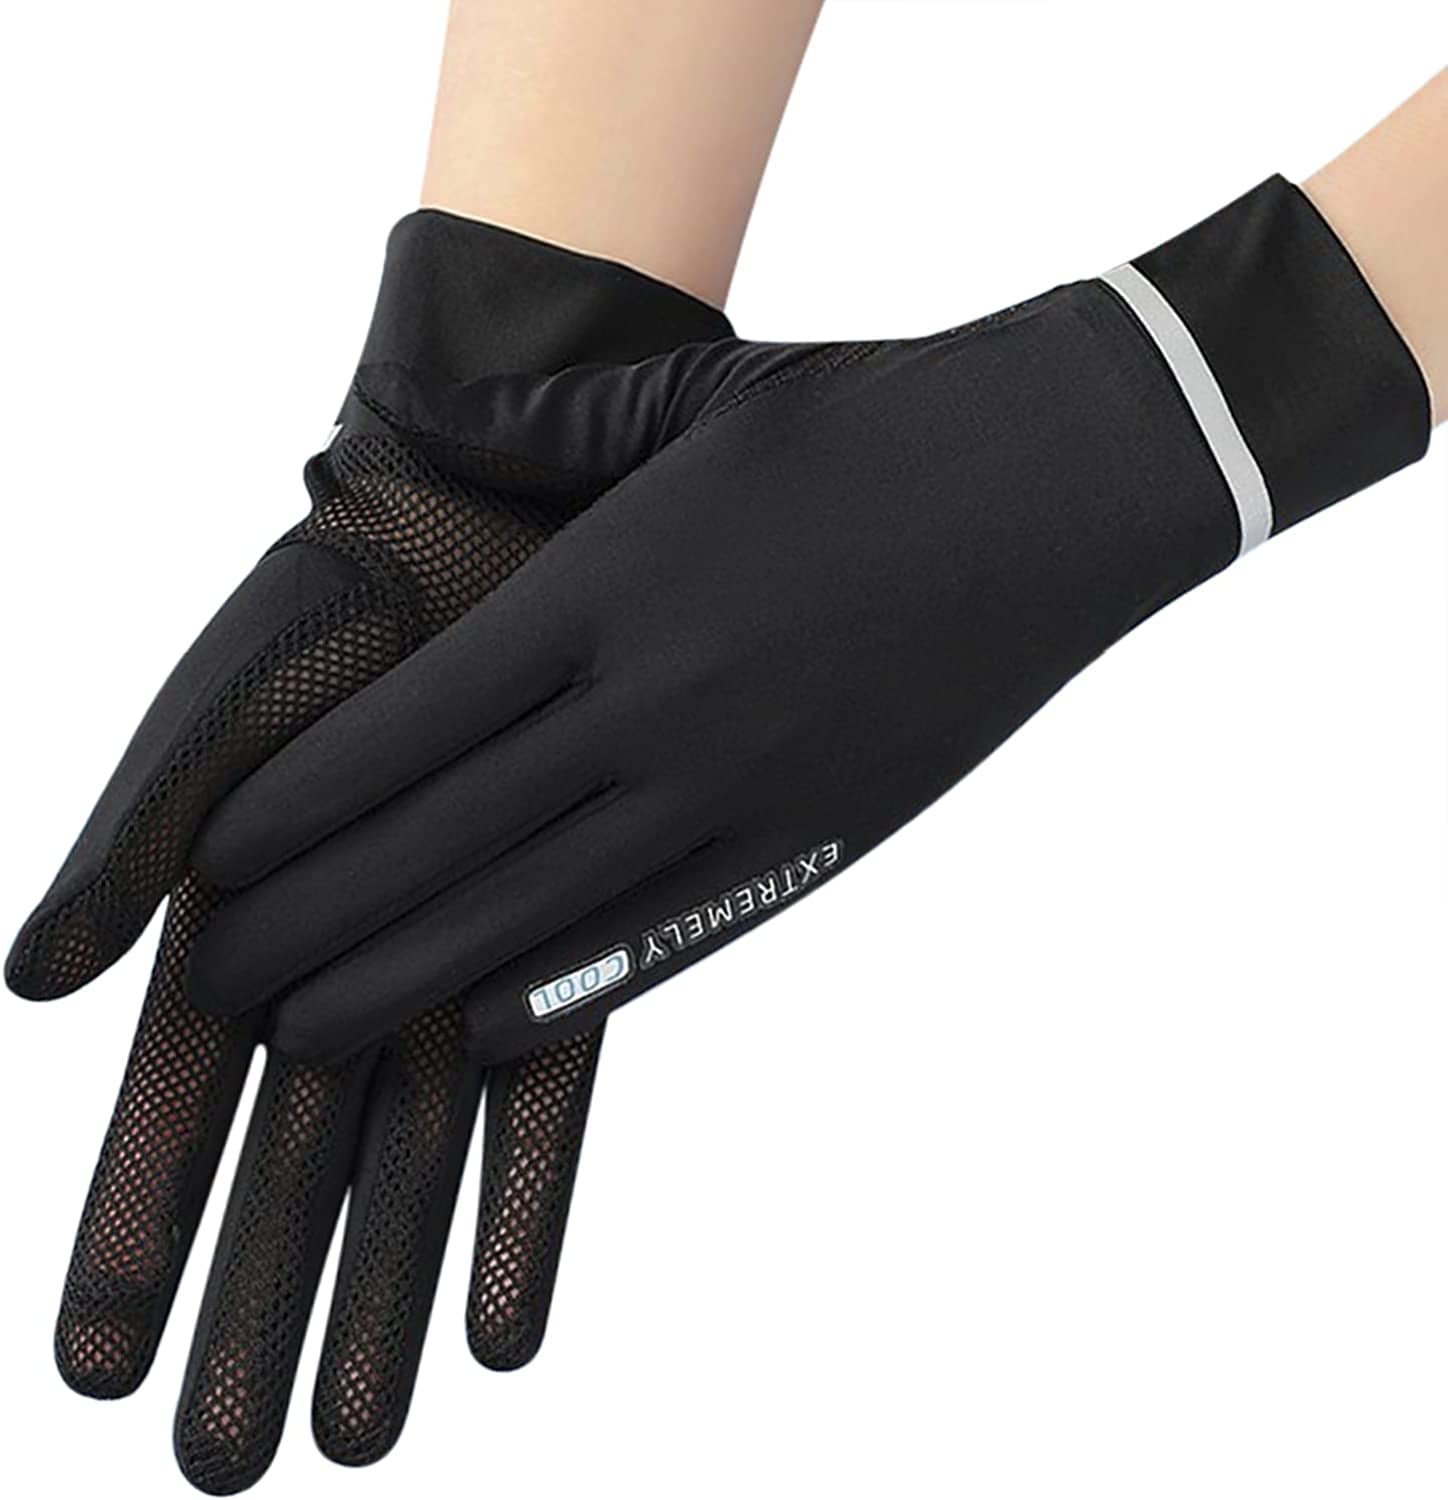 Women Summer UPF 50+ UV Sun Protection Gloves 2 Fingers Flip Mesh Cooling  Breathable Touchscreen Anti Slip Mittens Full Finger Quick Dry Hand Gloves  for Driving Riding Cycling Lady Girls Mitt 